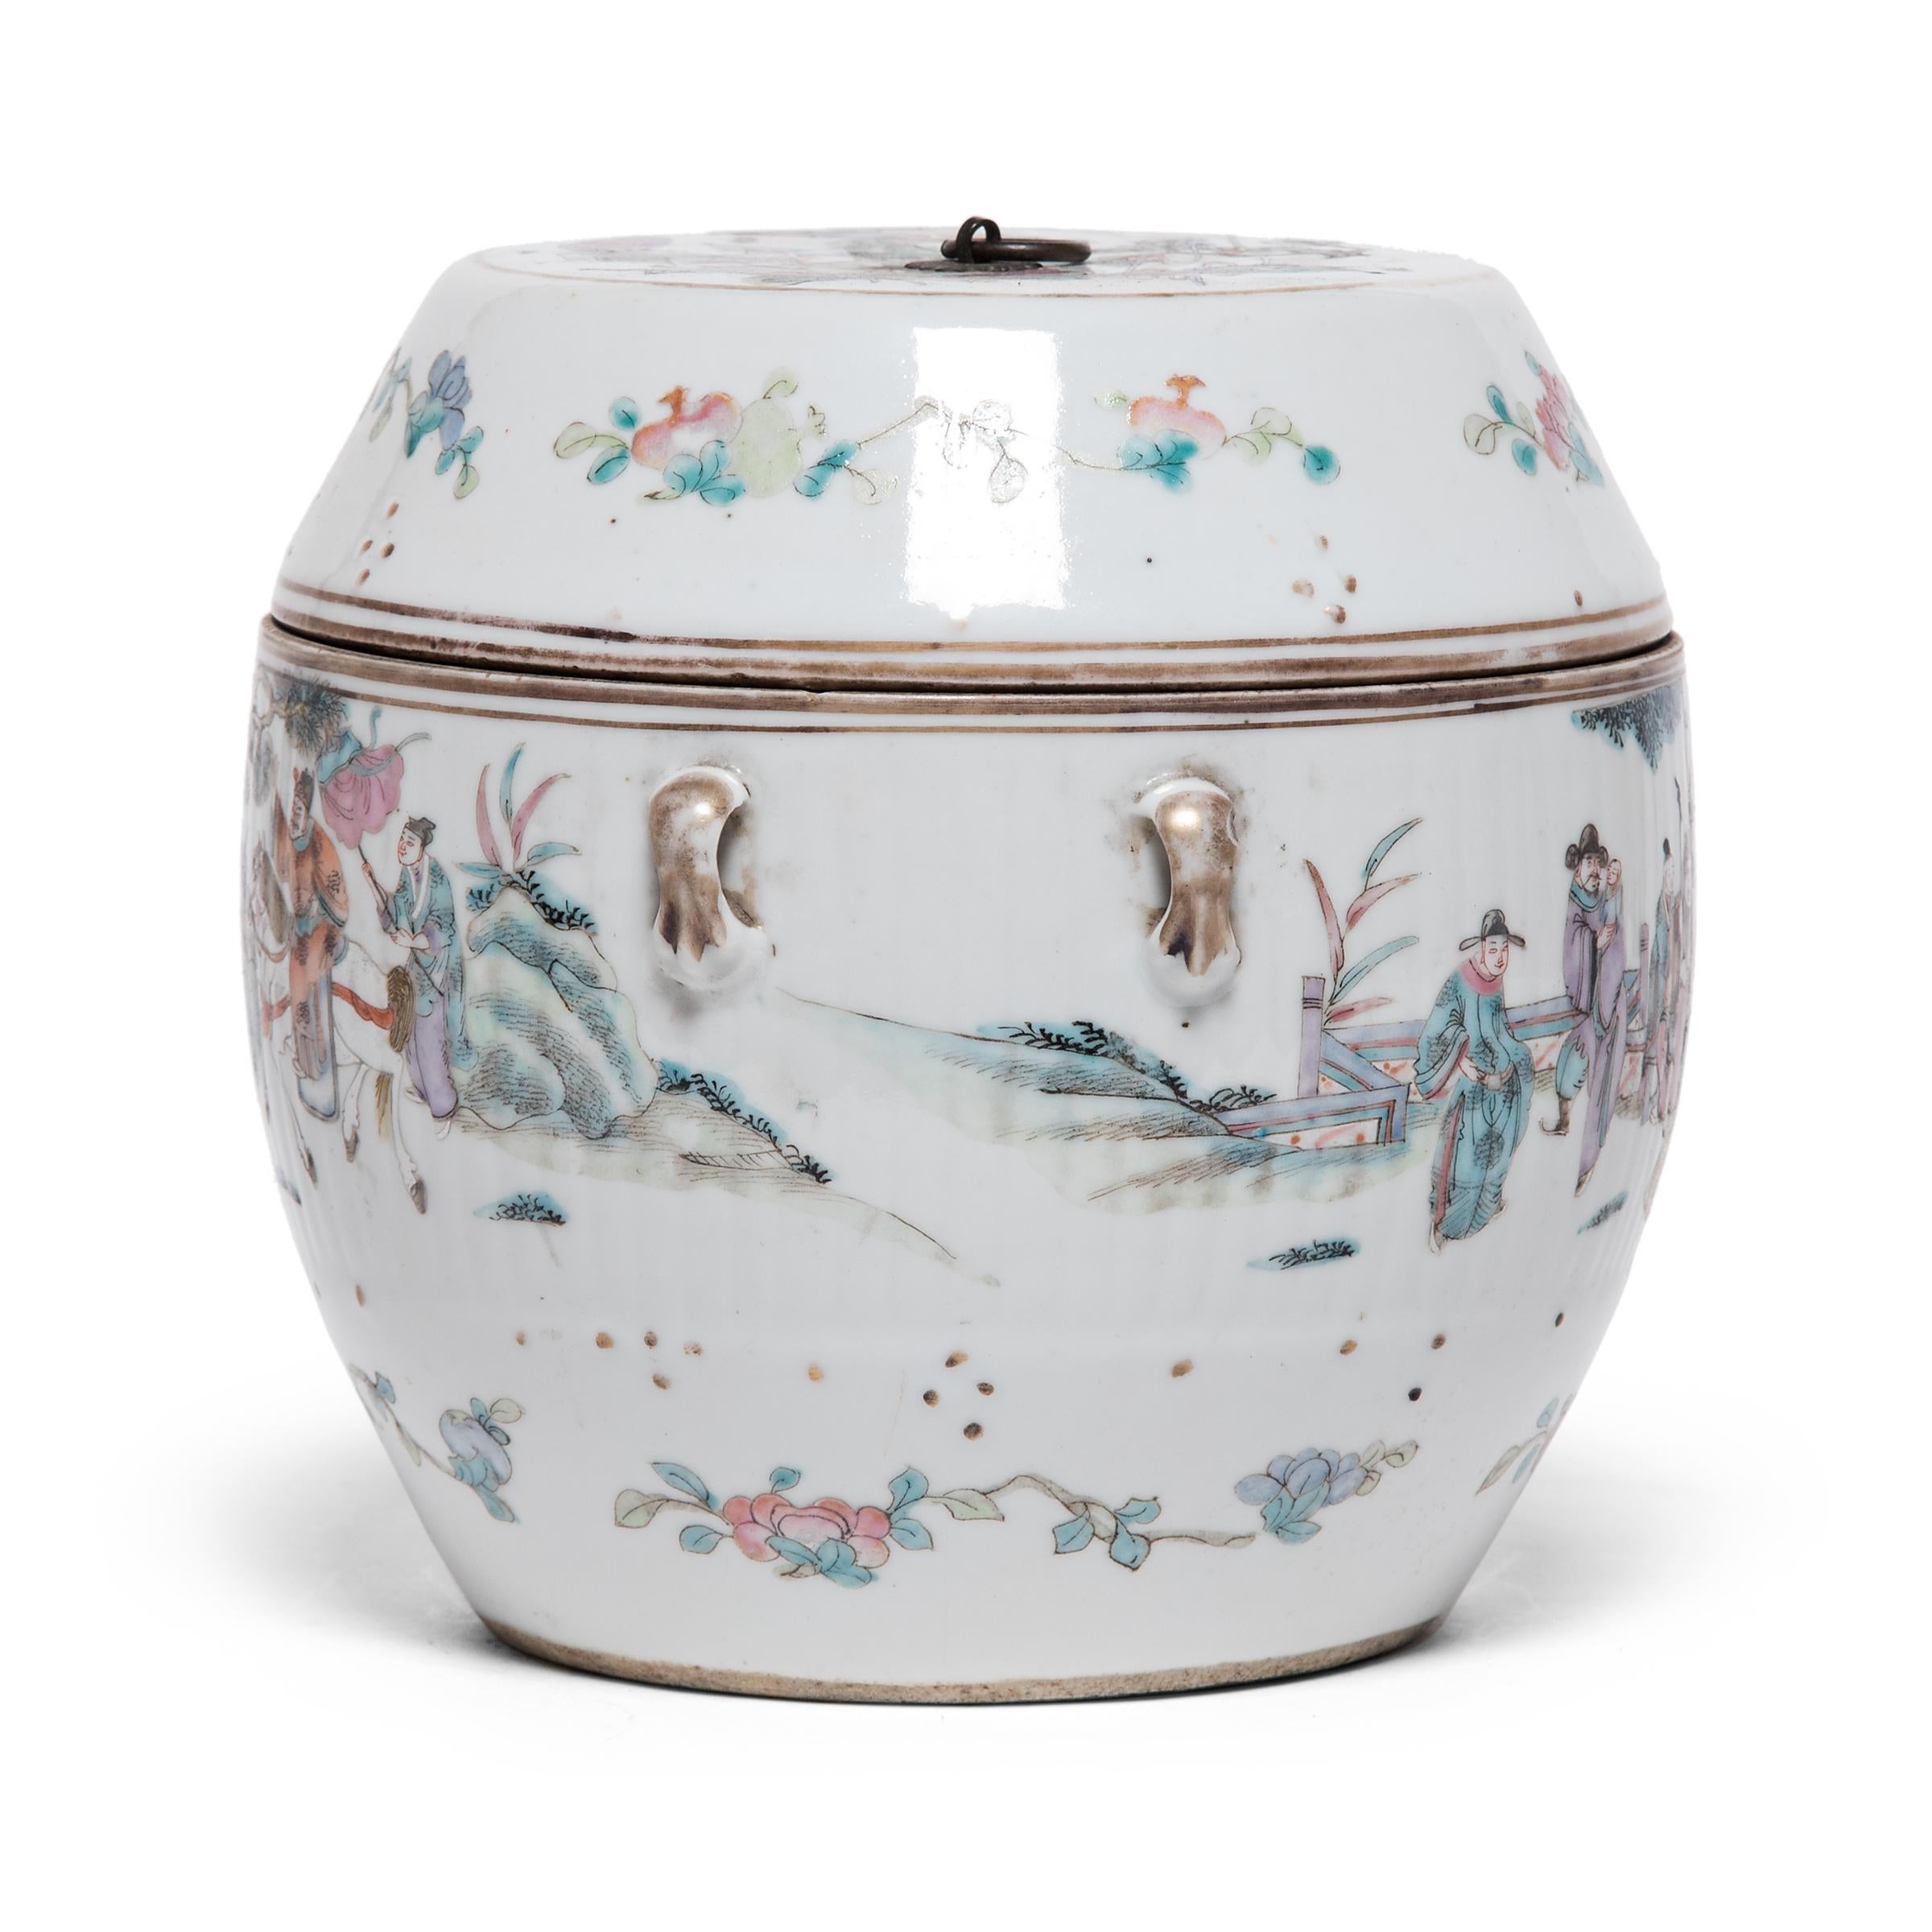 Enameled Chinese Famille Rose Soup Tureen with Courtly Gathering, c. 1870